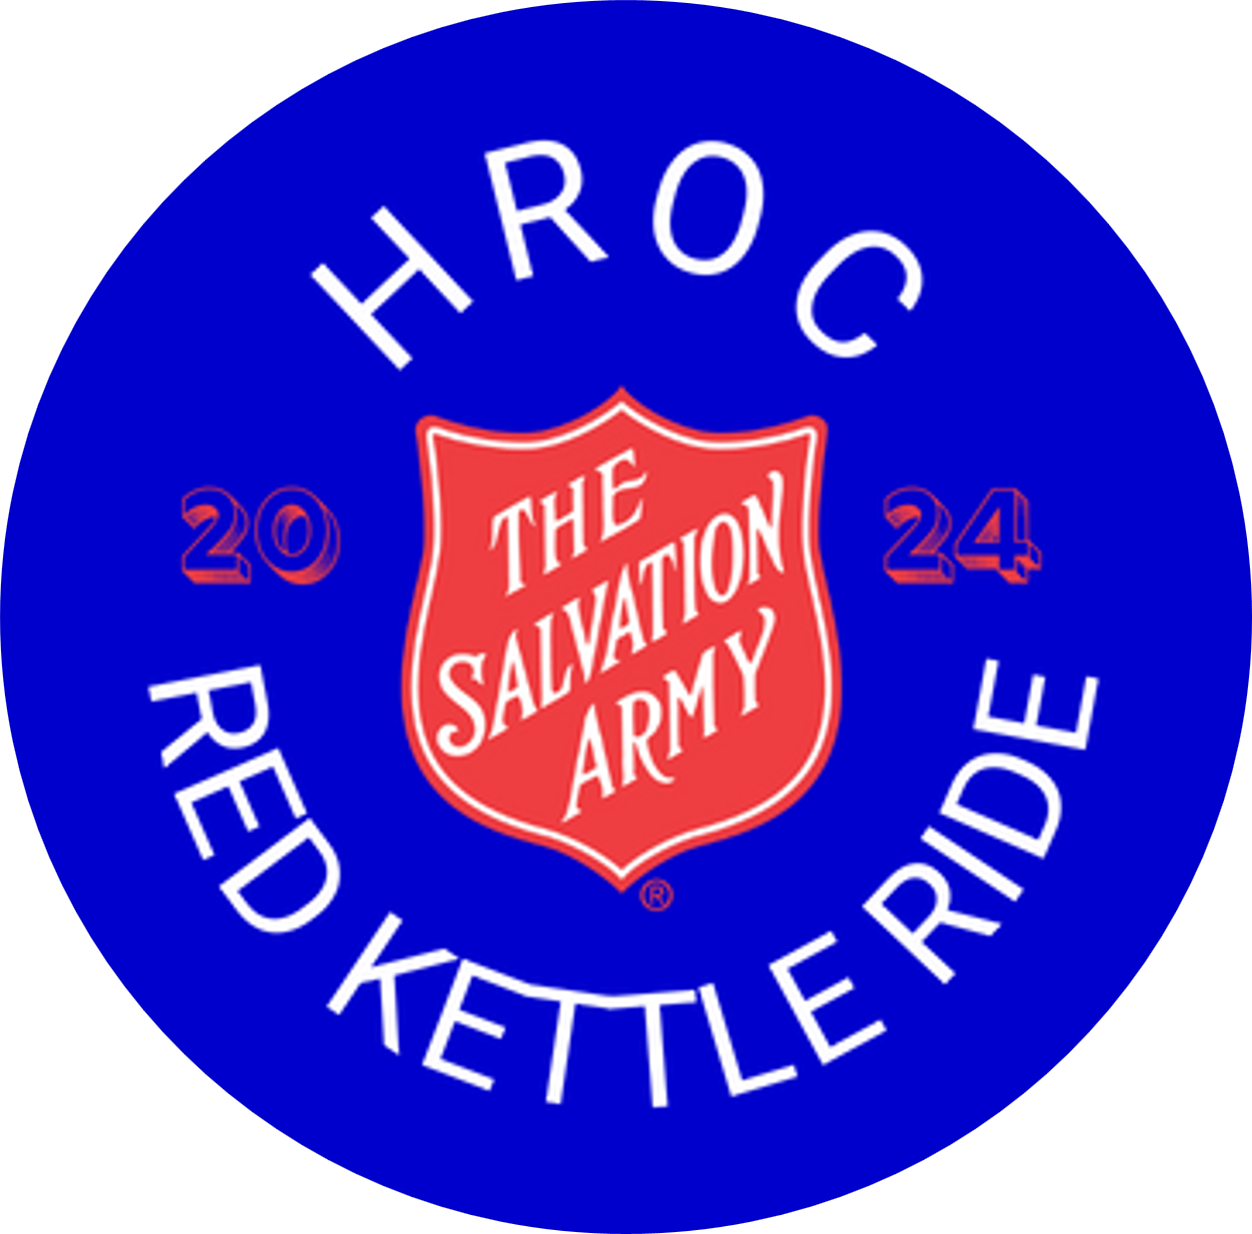 HROC Red Kettle Ride